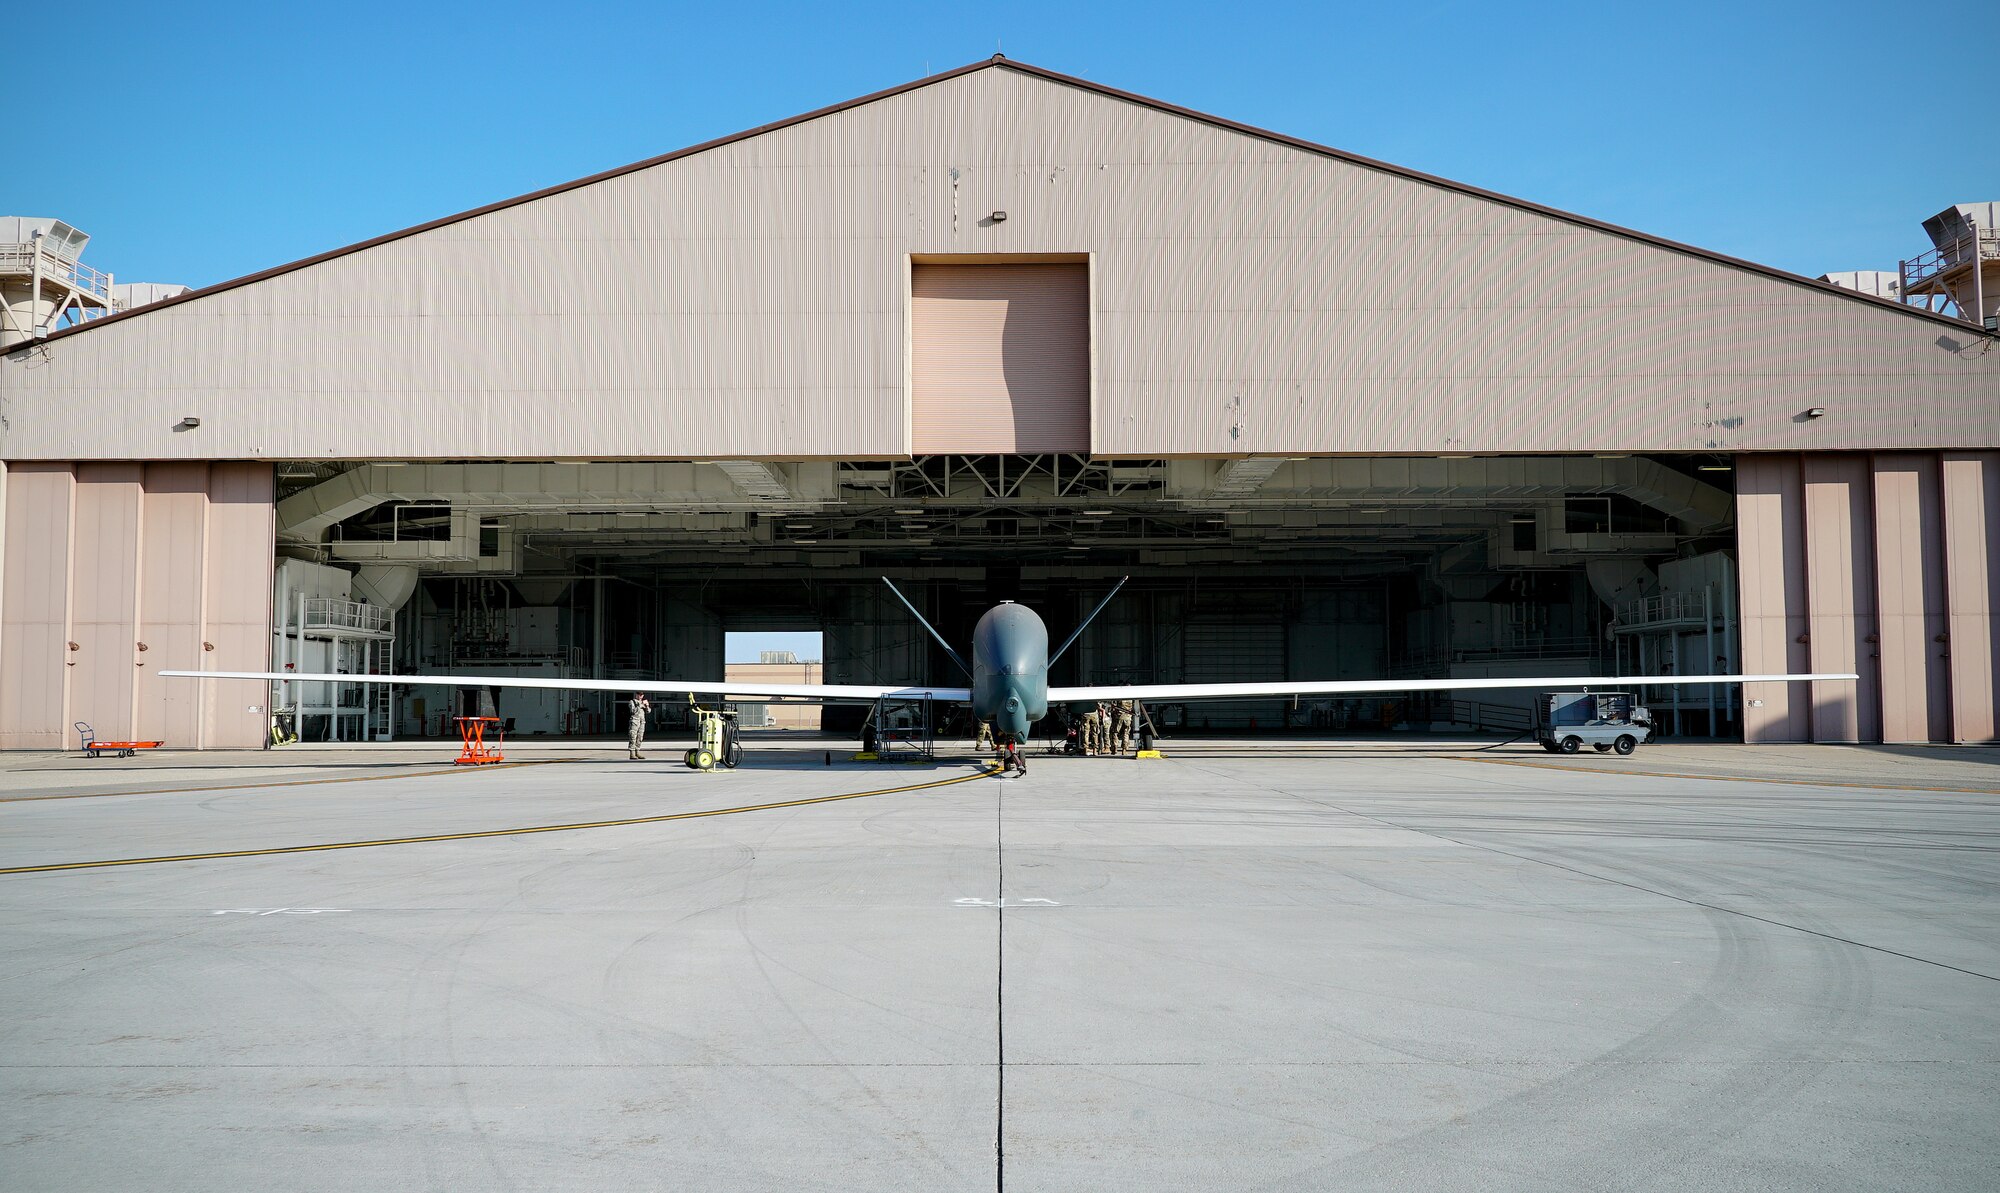 A small unmanned aircraft is shown in center frame in front o f an open hangar, with its wingspan shown in entirety from left to right of the picture.